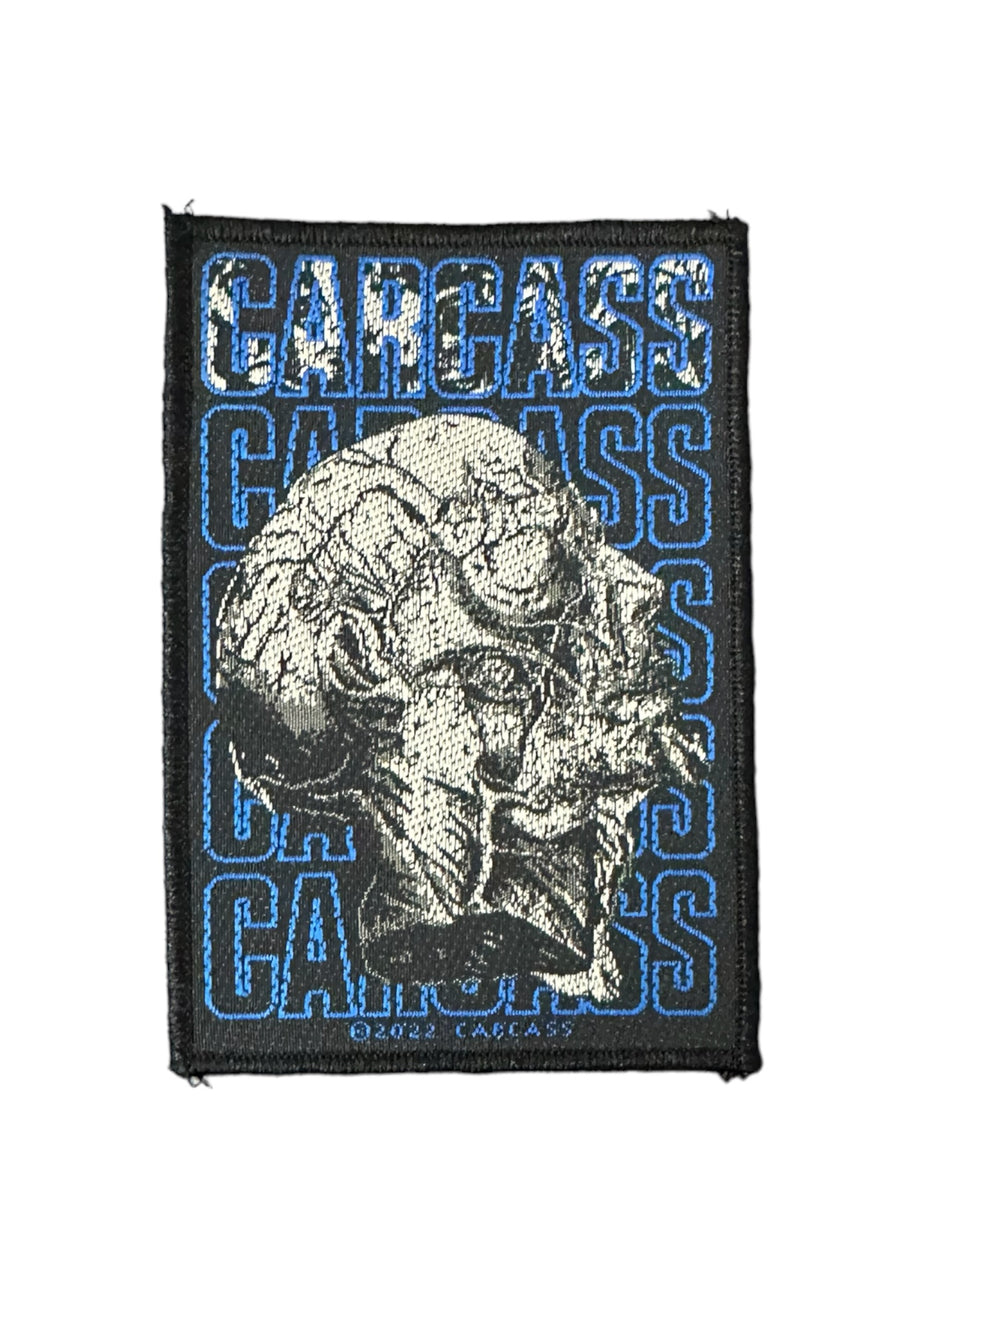 Carcass Necro Head Official Woven Patch Brand New